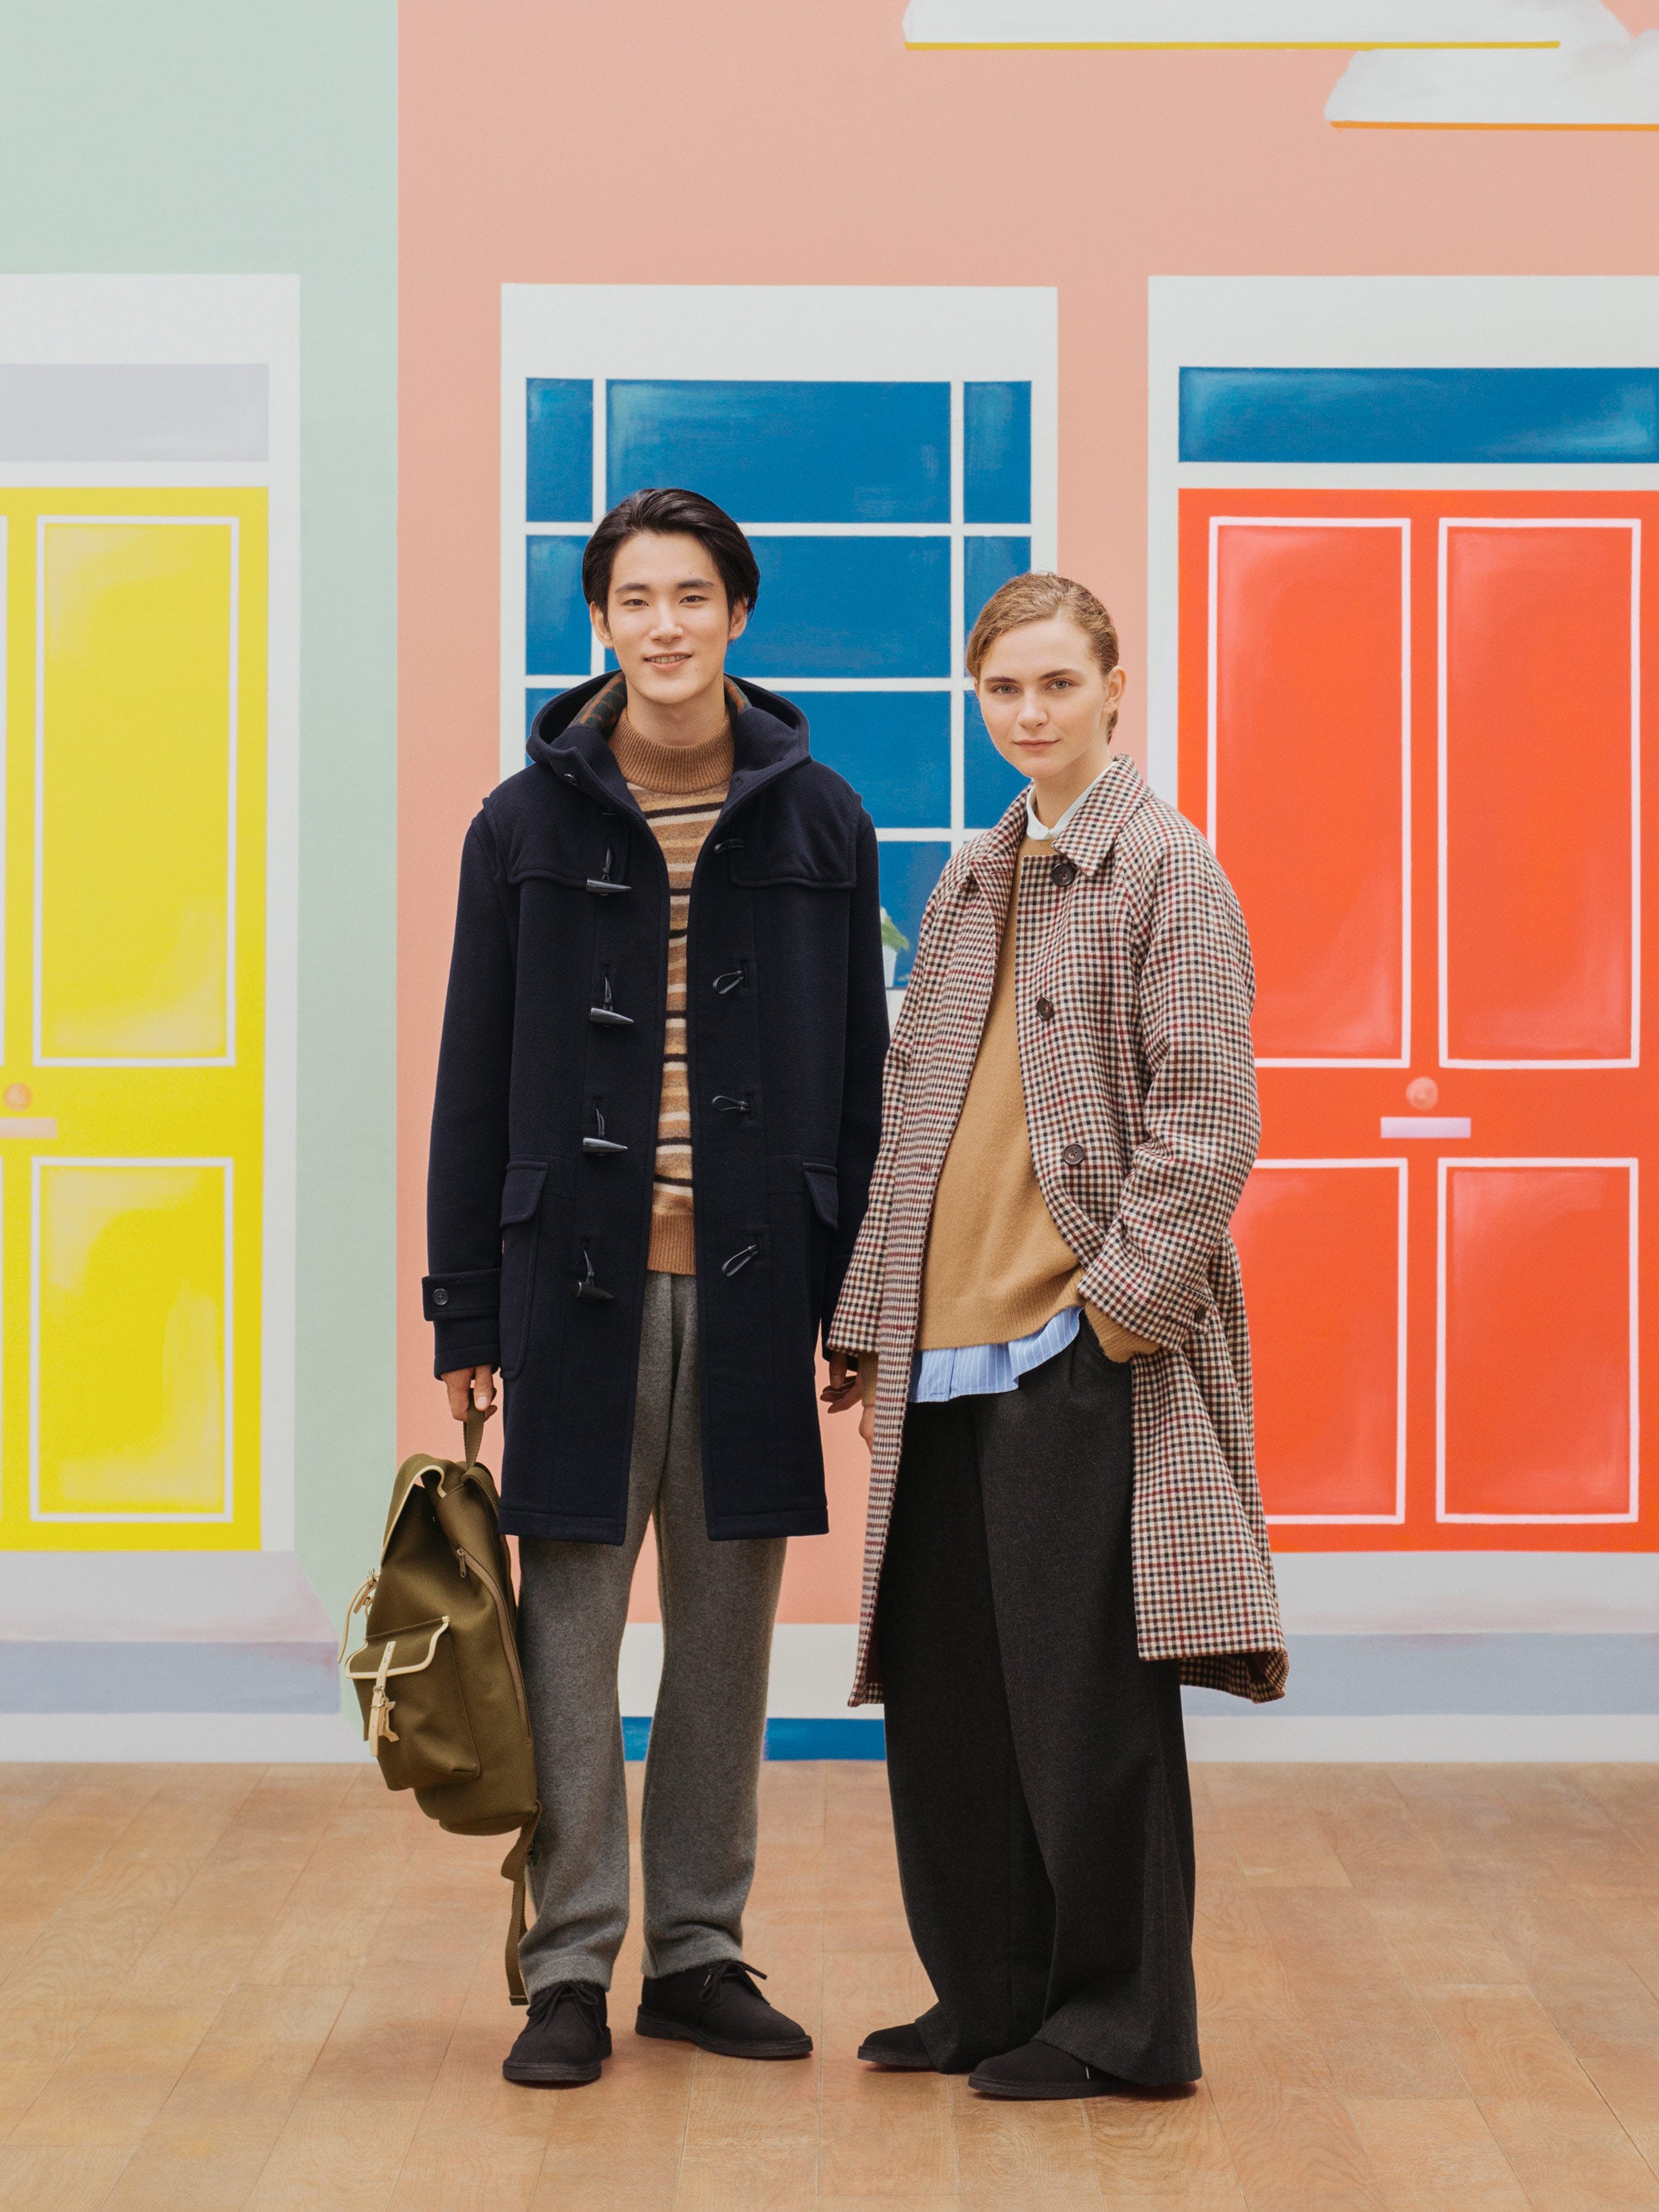 JW Anderson X Uniqlo Spring Summer 2020 Collection